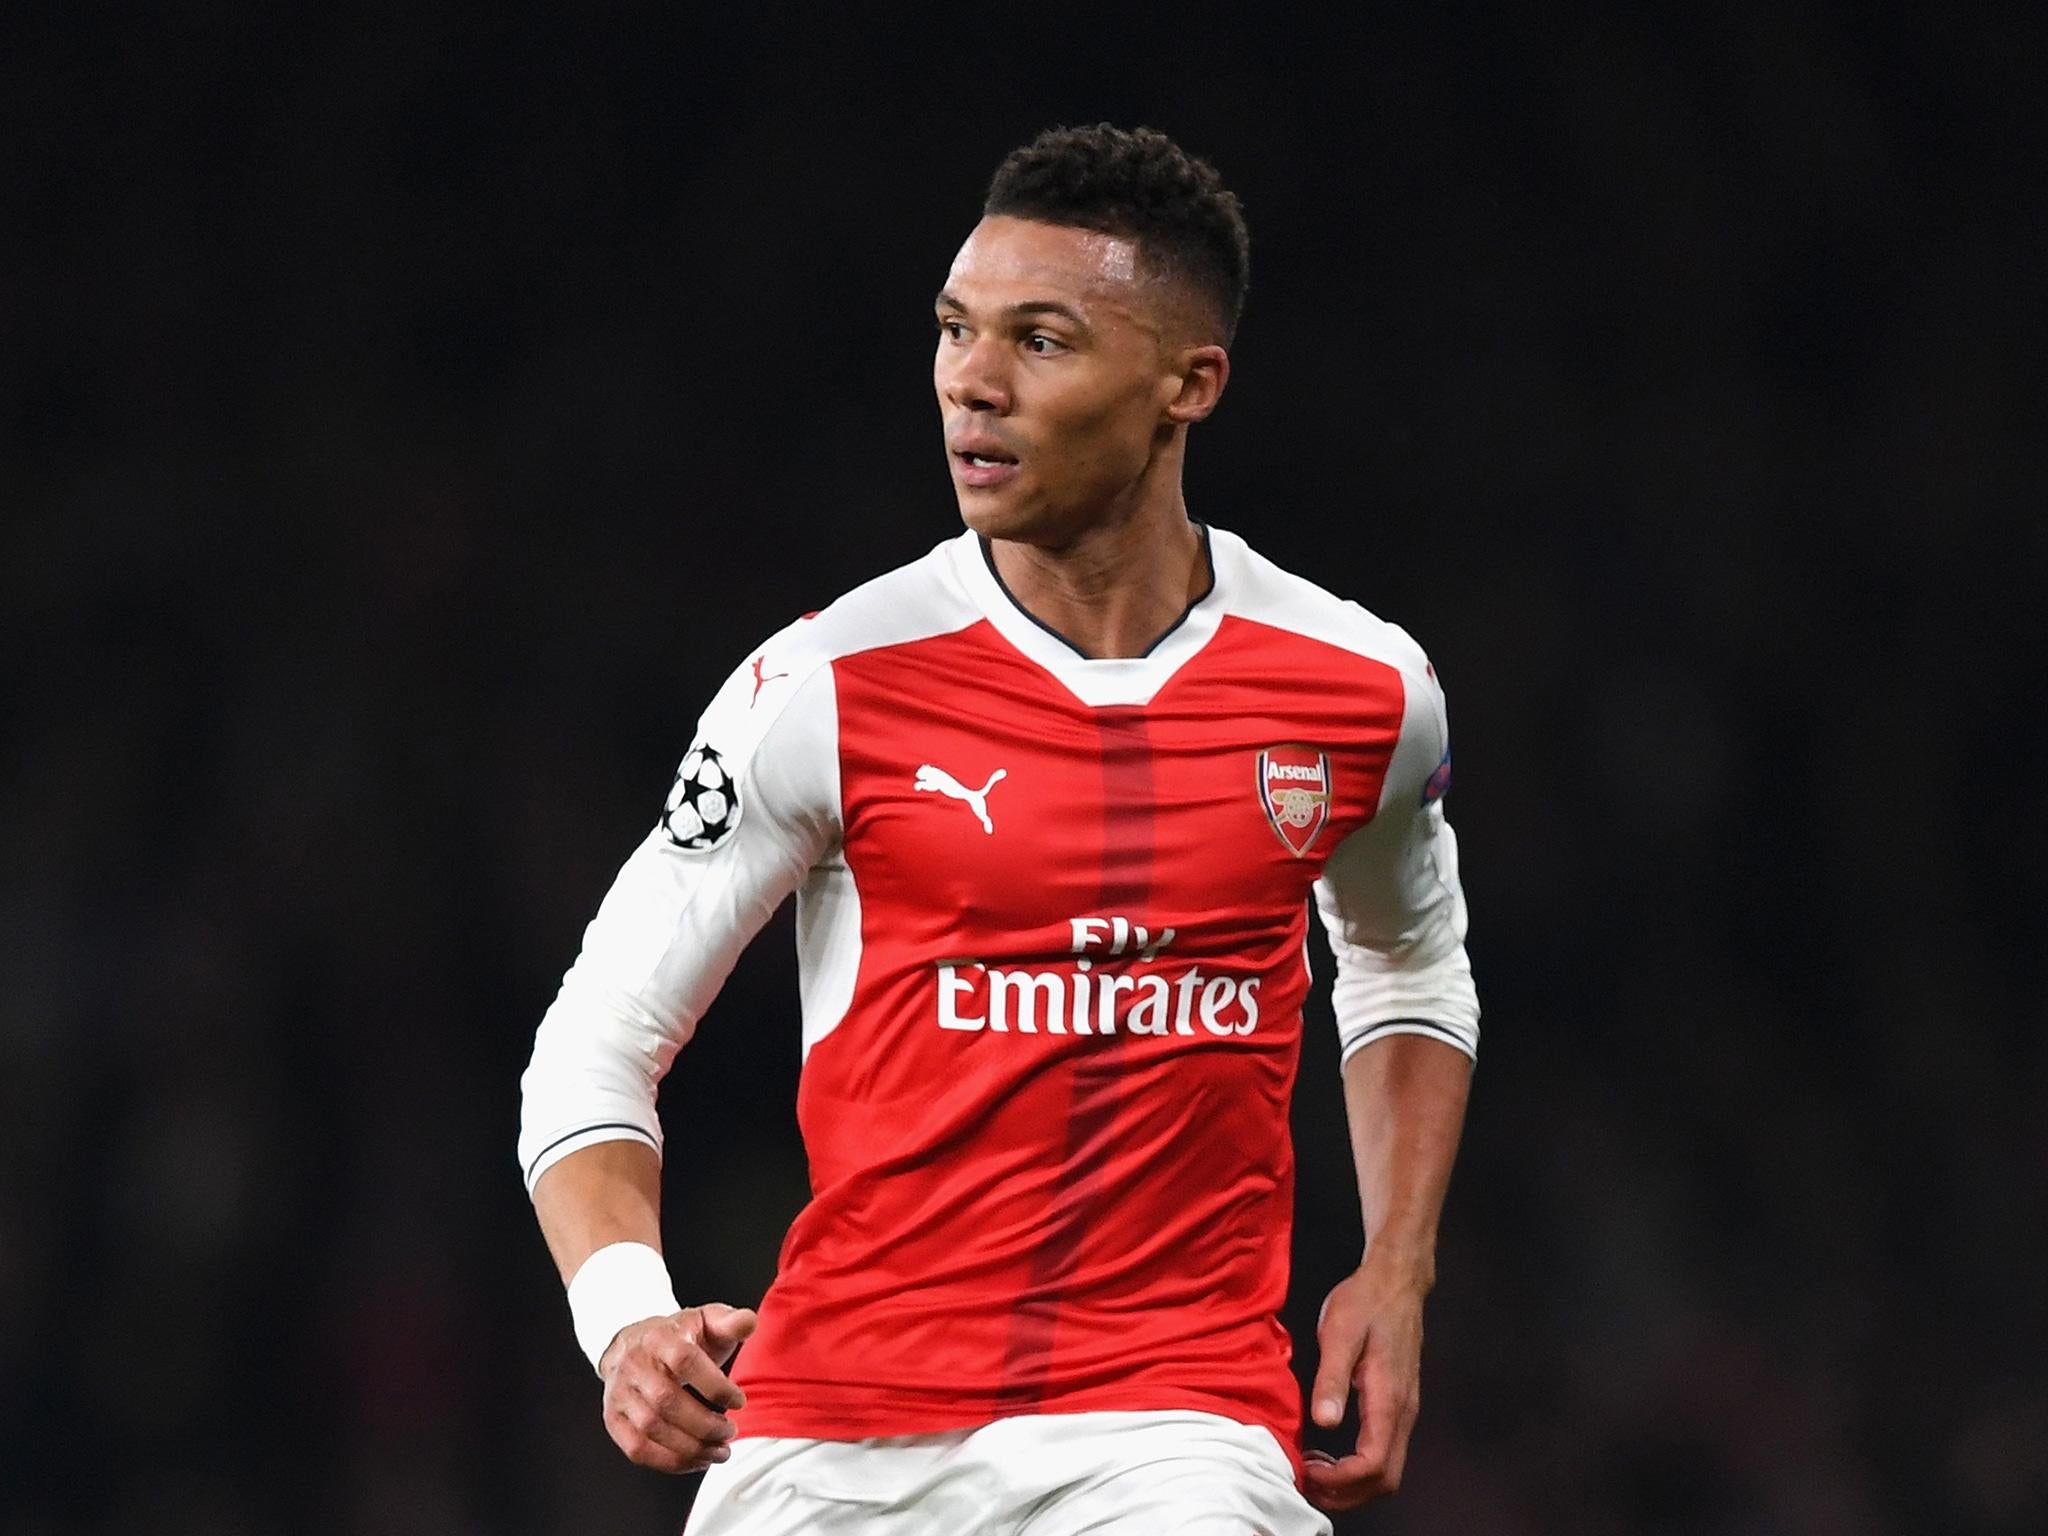 Arsenal are looking to cash in on Gibbs